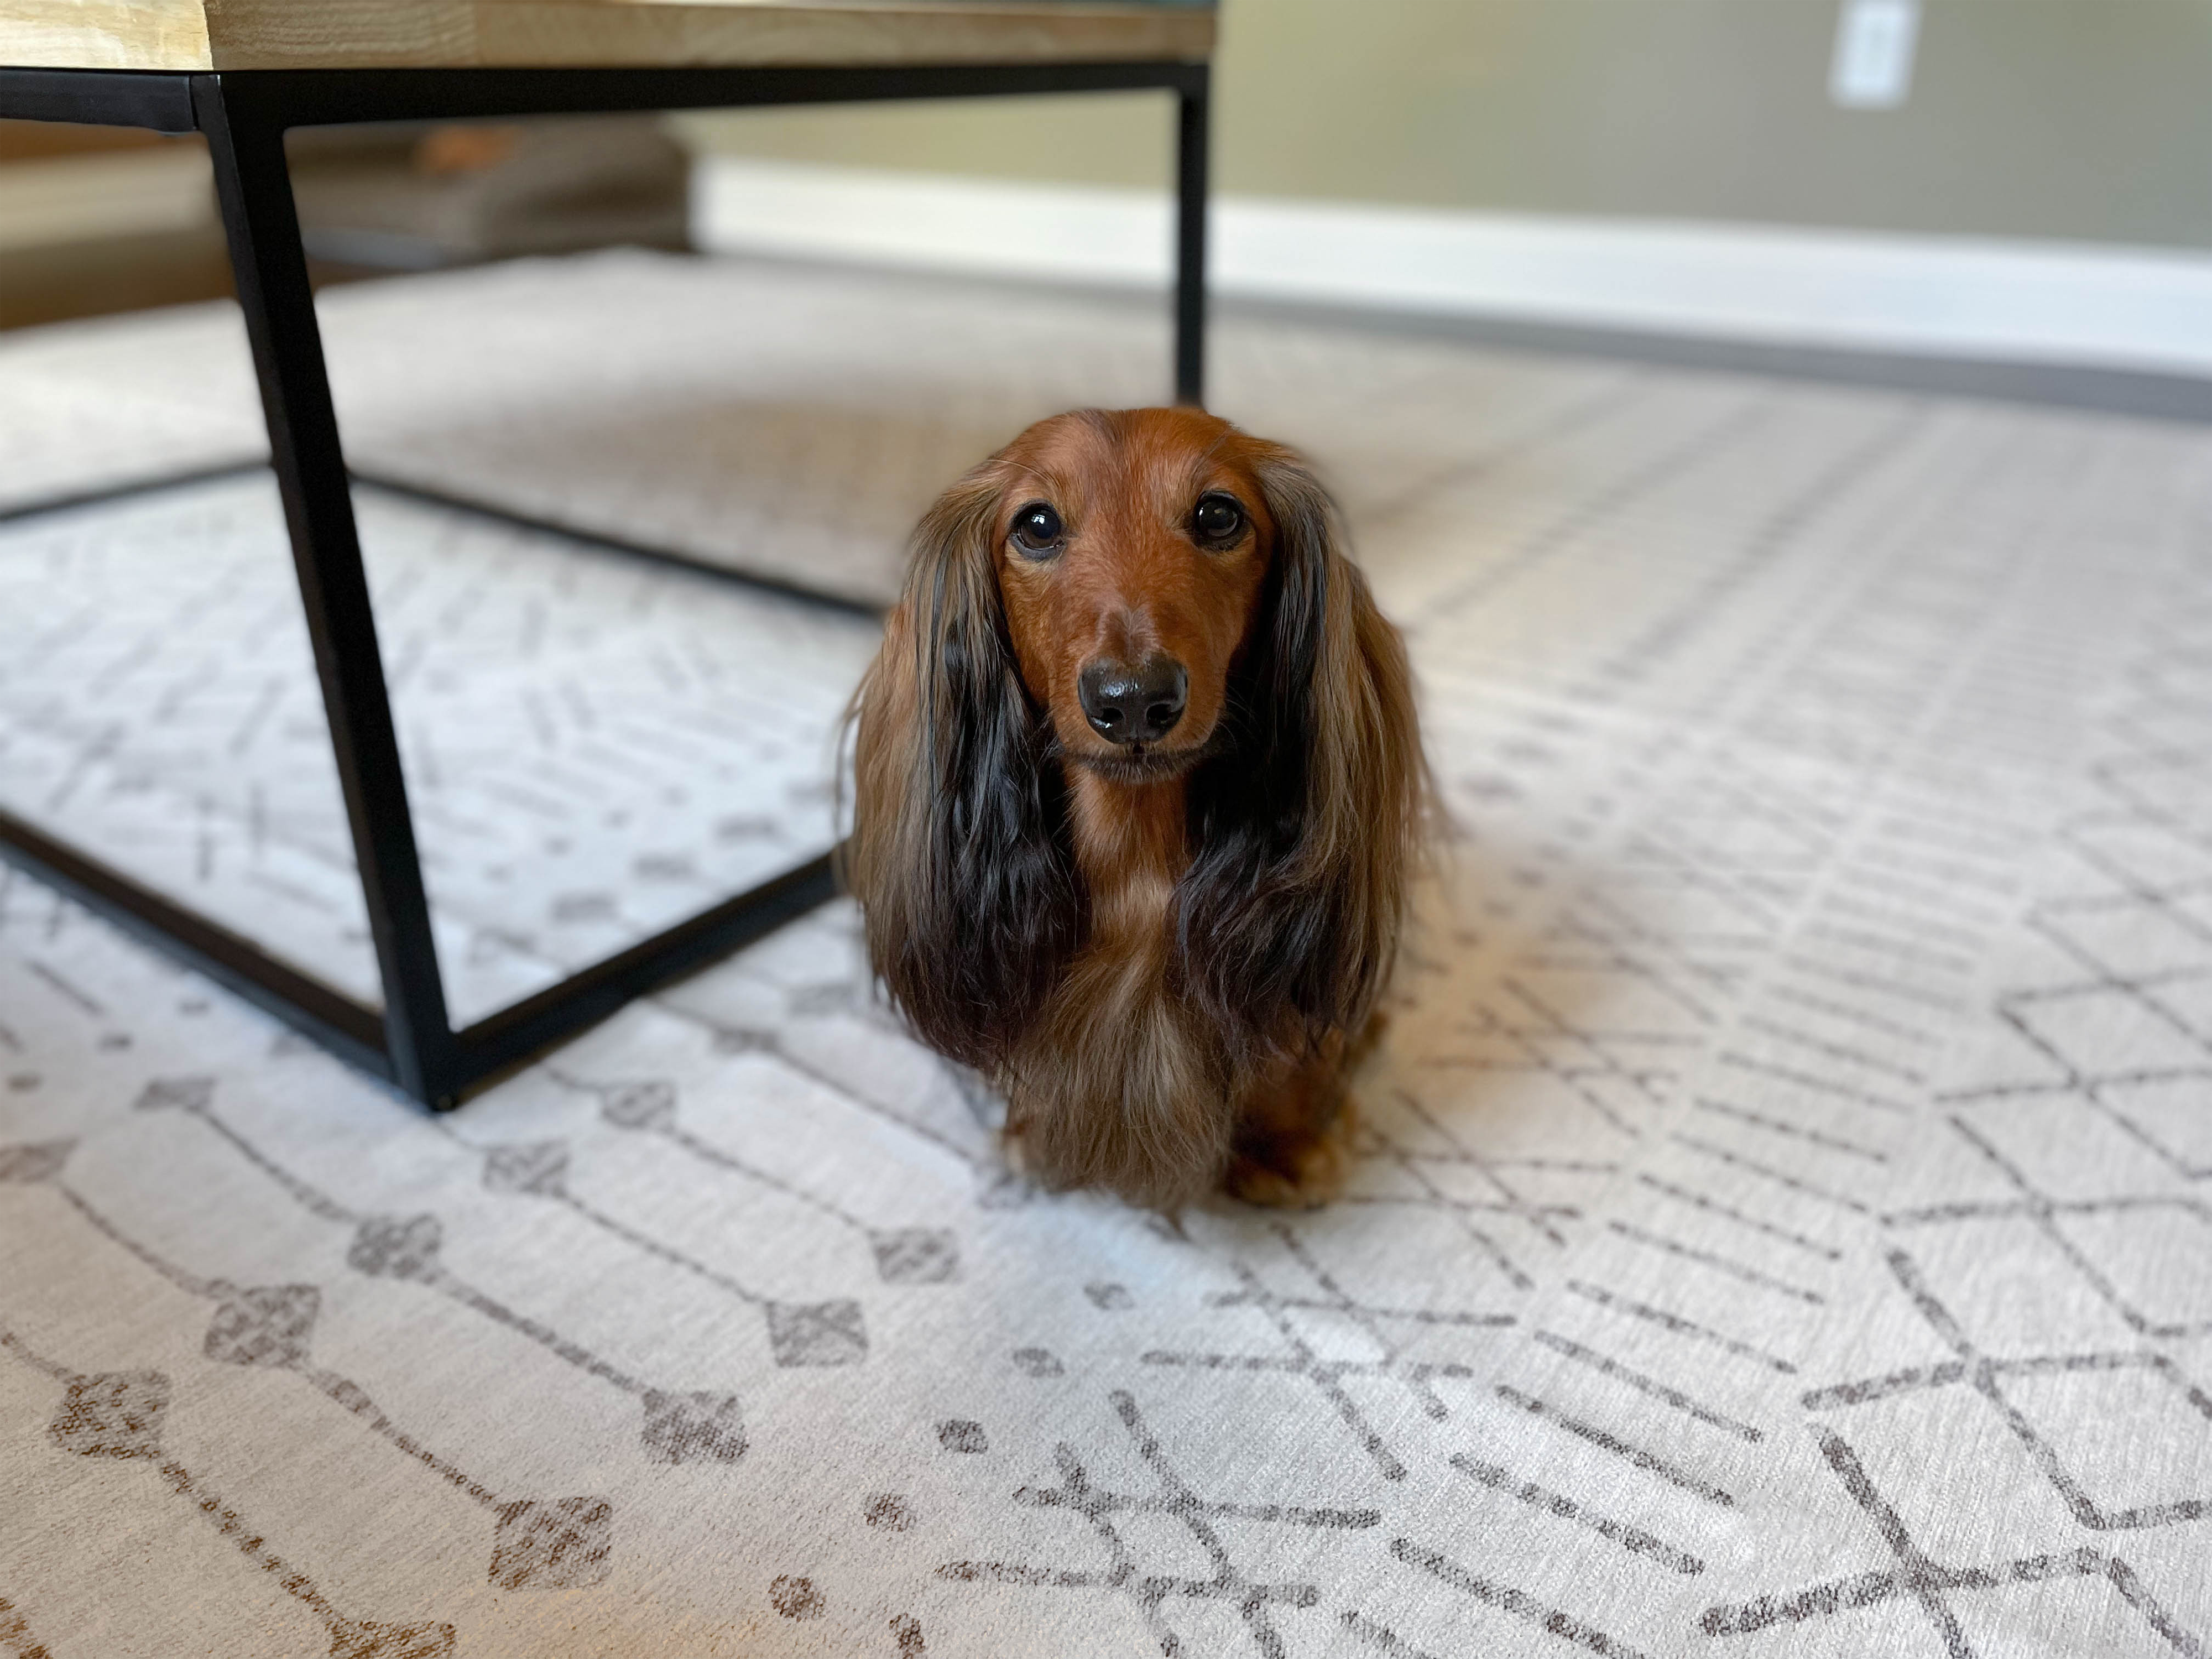 Tumble Rugs Review: Best Washable Rug for Toddlers, Pets, and